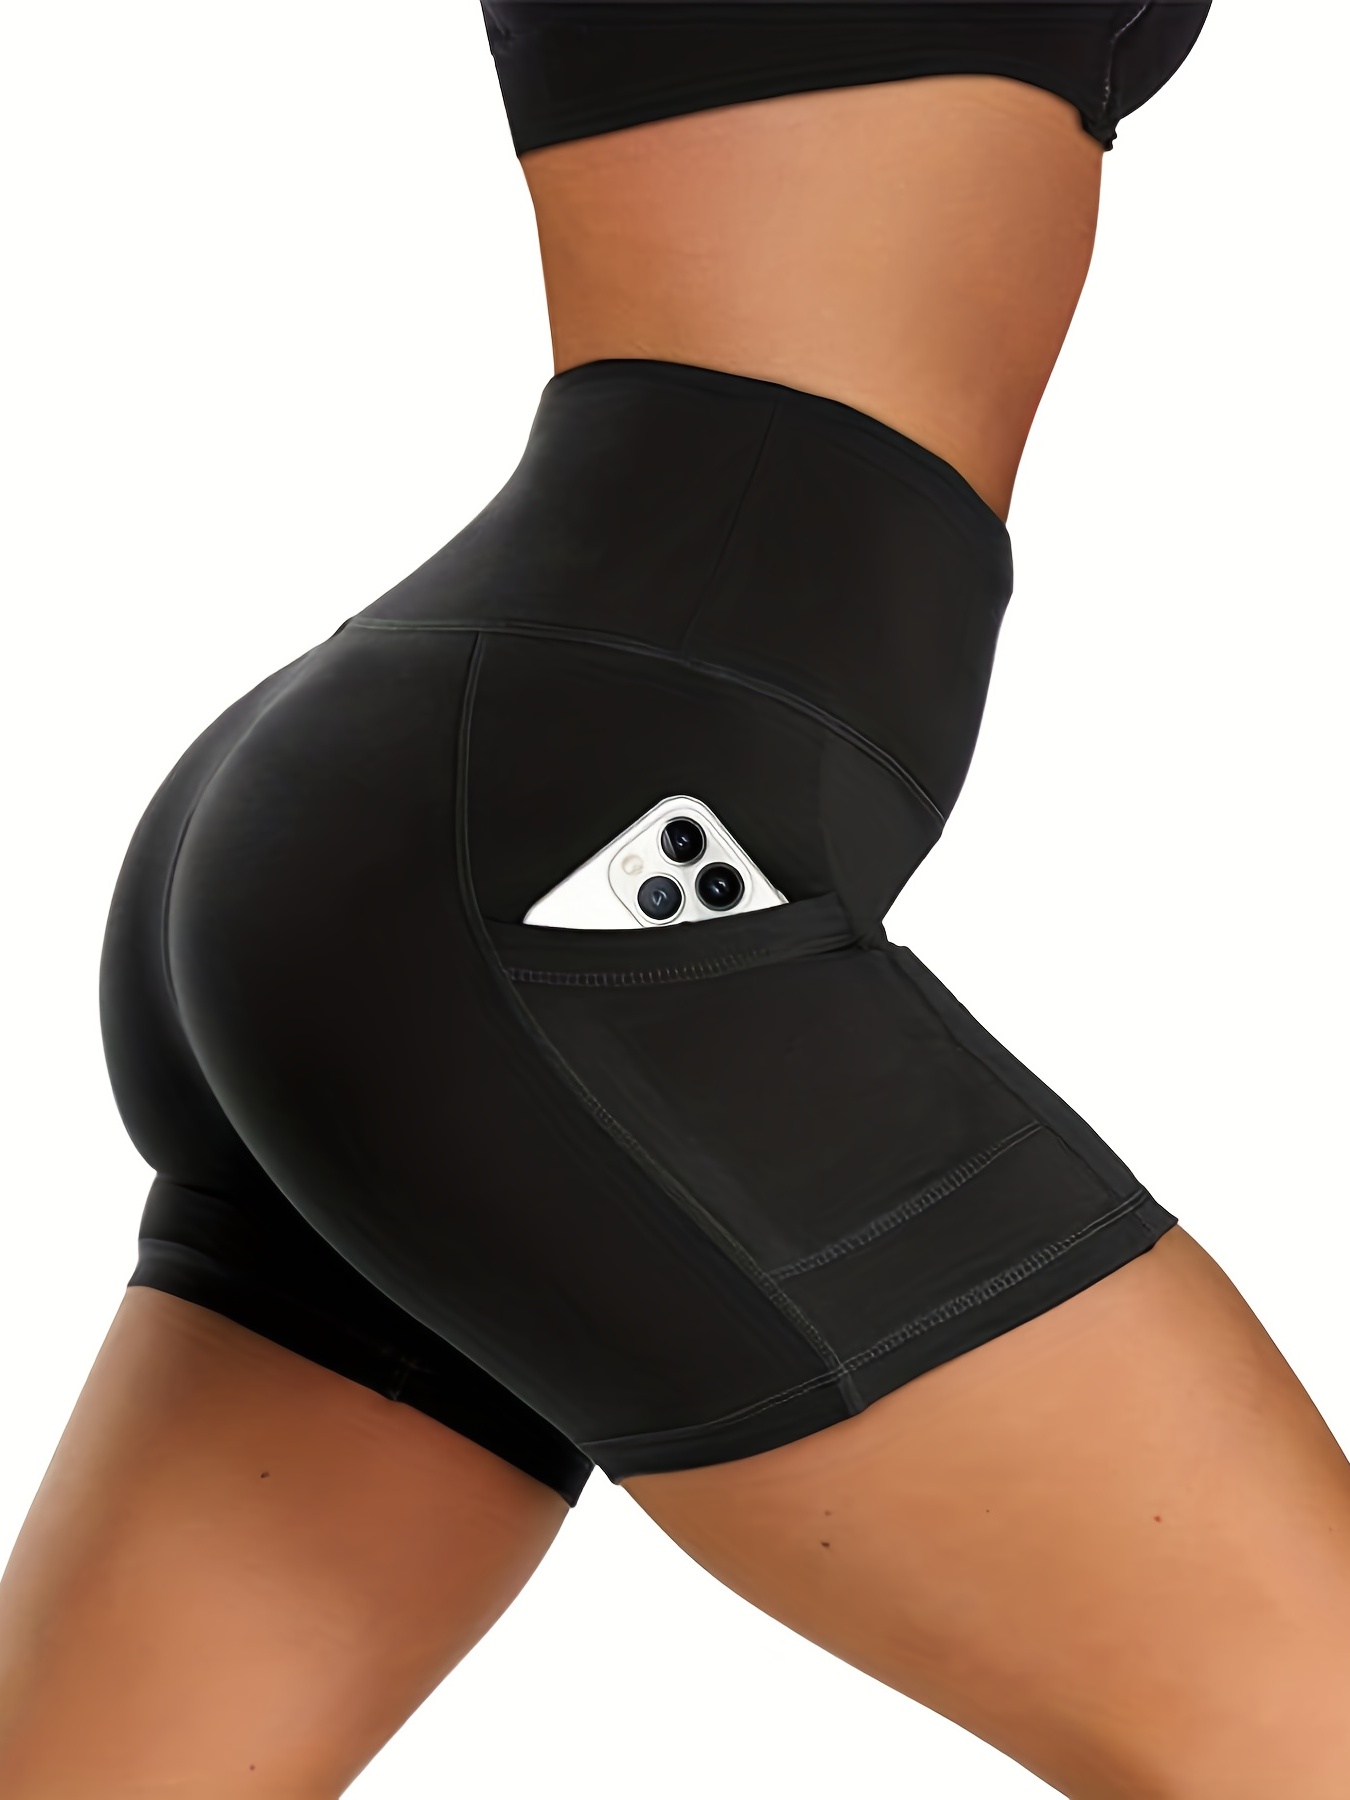 Stretchy Spandex Mini Aeropostale Yoga Shorts For Women And Men Loose Fit  Sportswear With Patchwork Design From Biancanne, $14.89